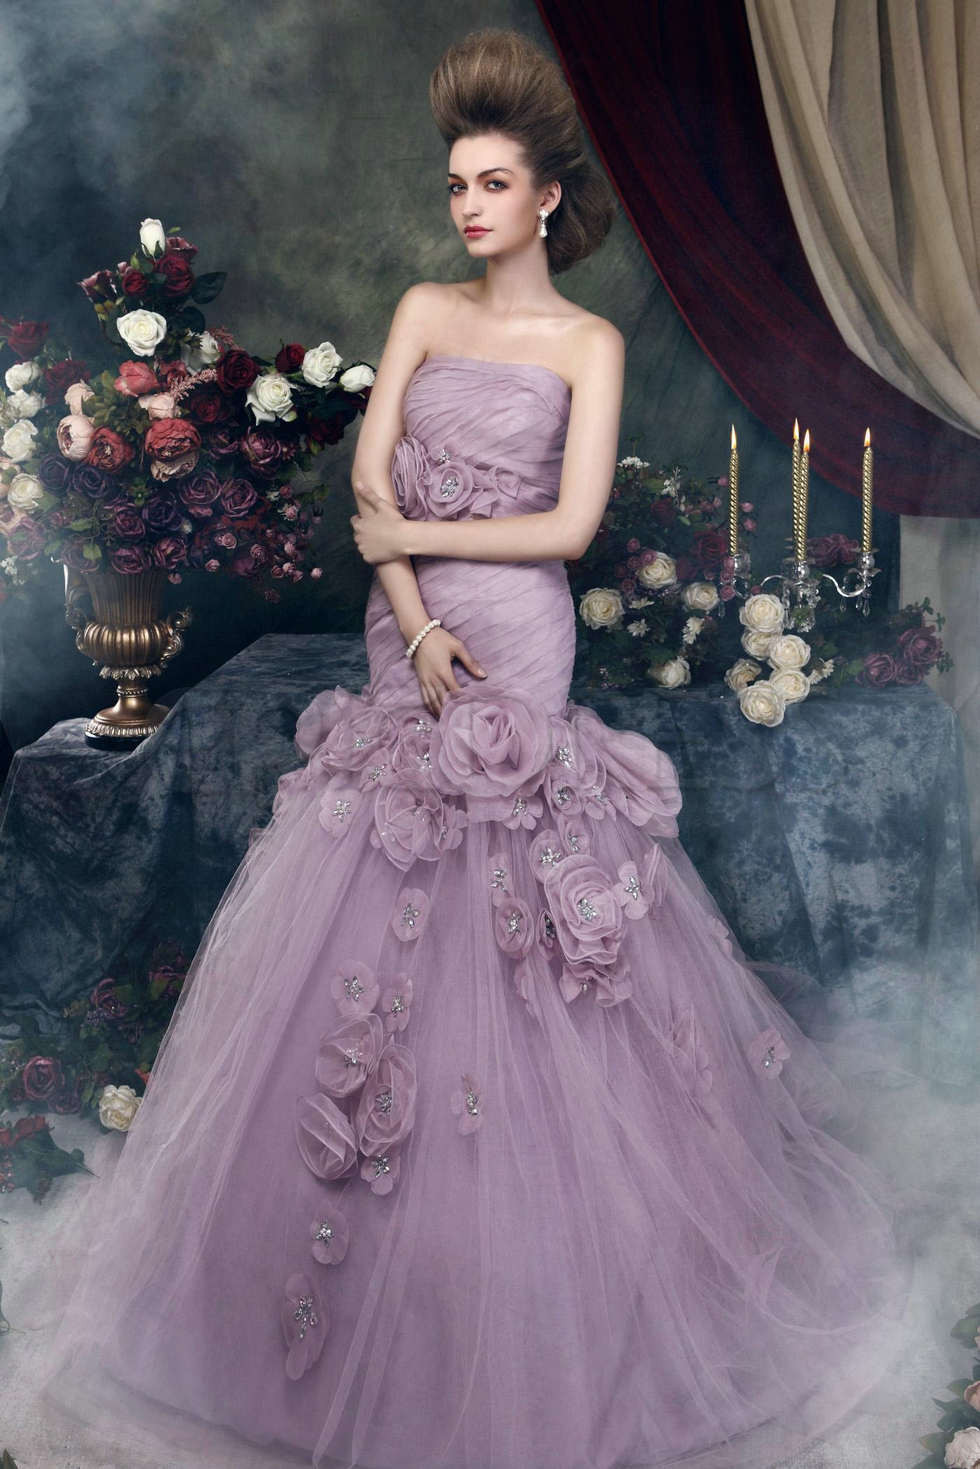 Colored Wedding Gown
 So Charming on a Purple Wedding Gown